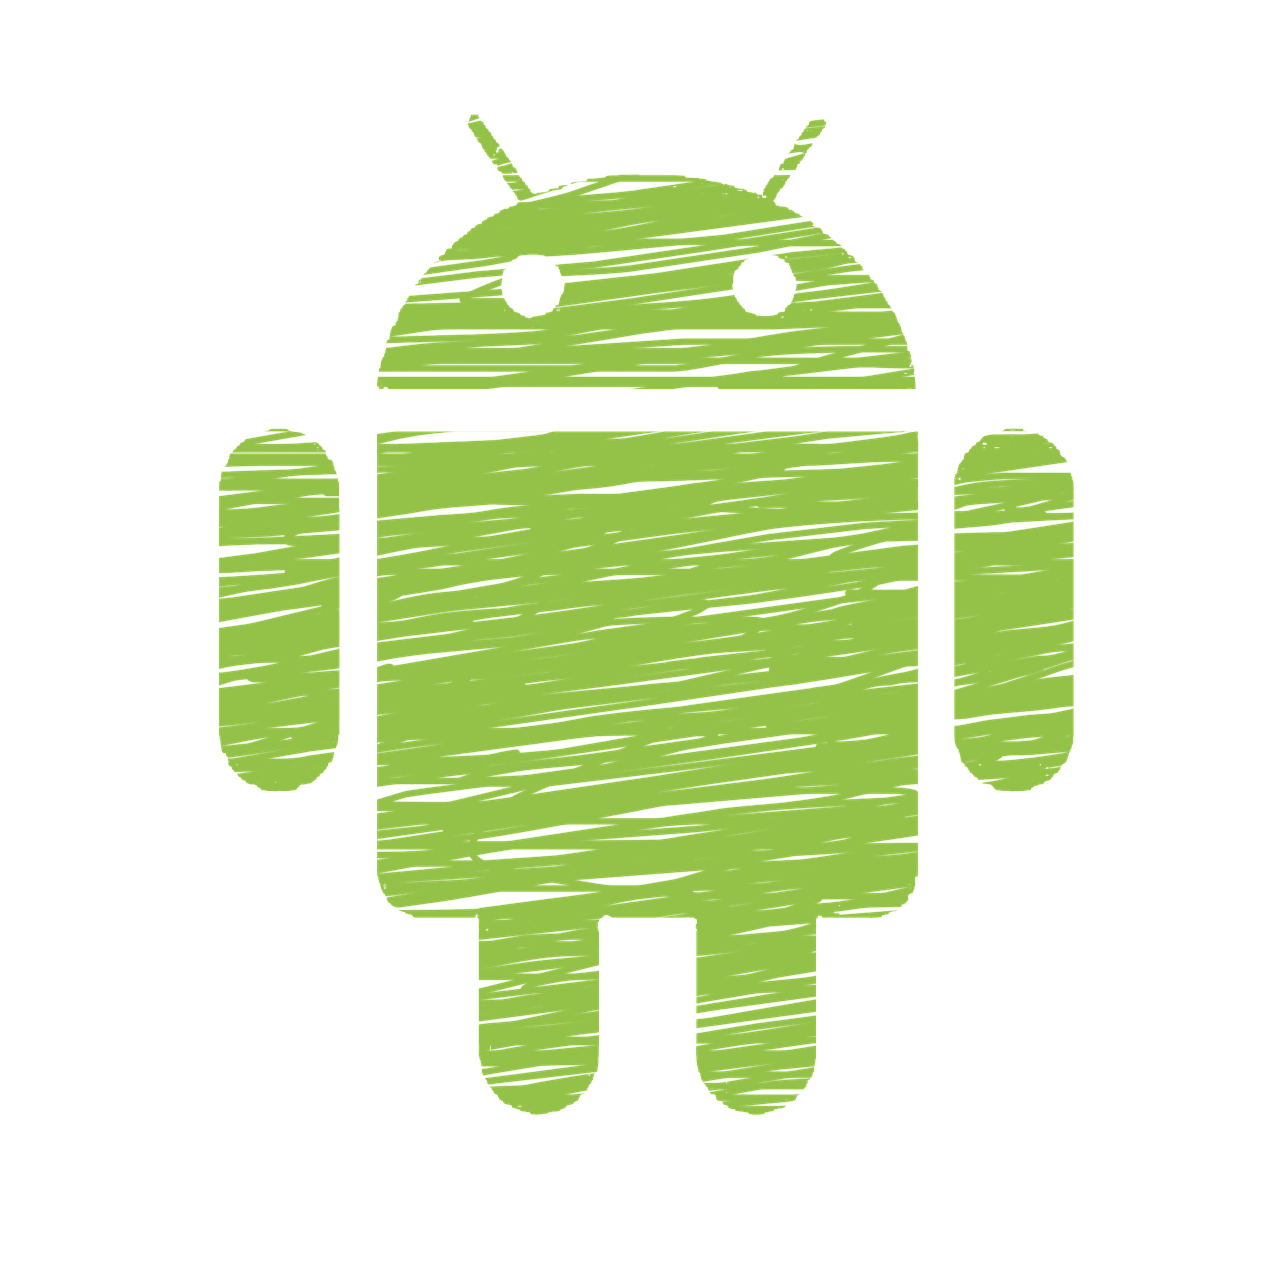 a green android logo on a black background, inspired by Android Jones, auto-destructive art, woodcut style, rustic and weathered, 🐿🍸🍋, a wooden